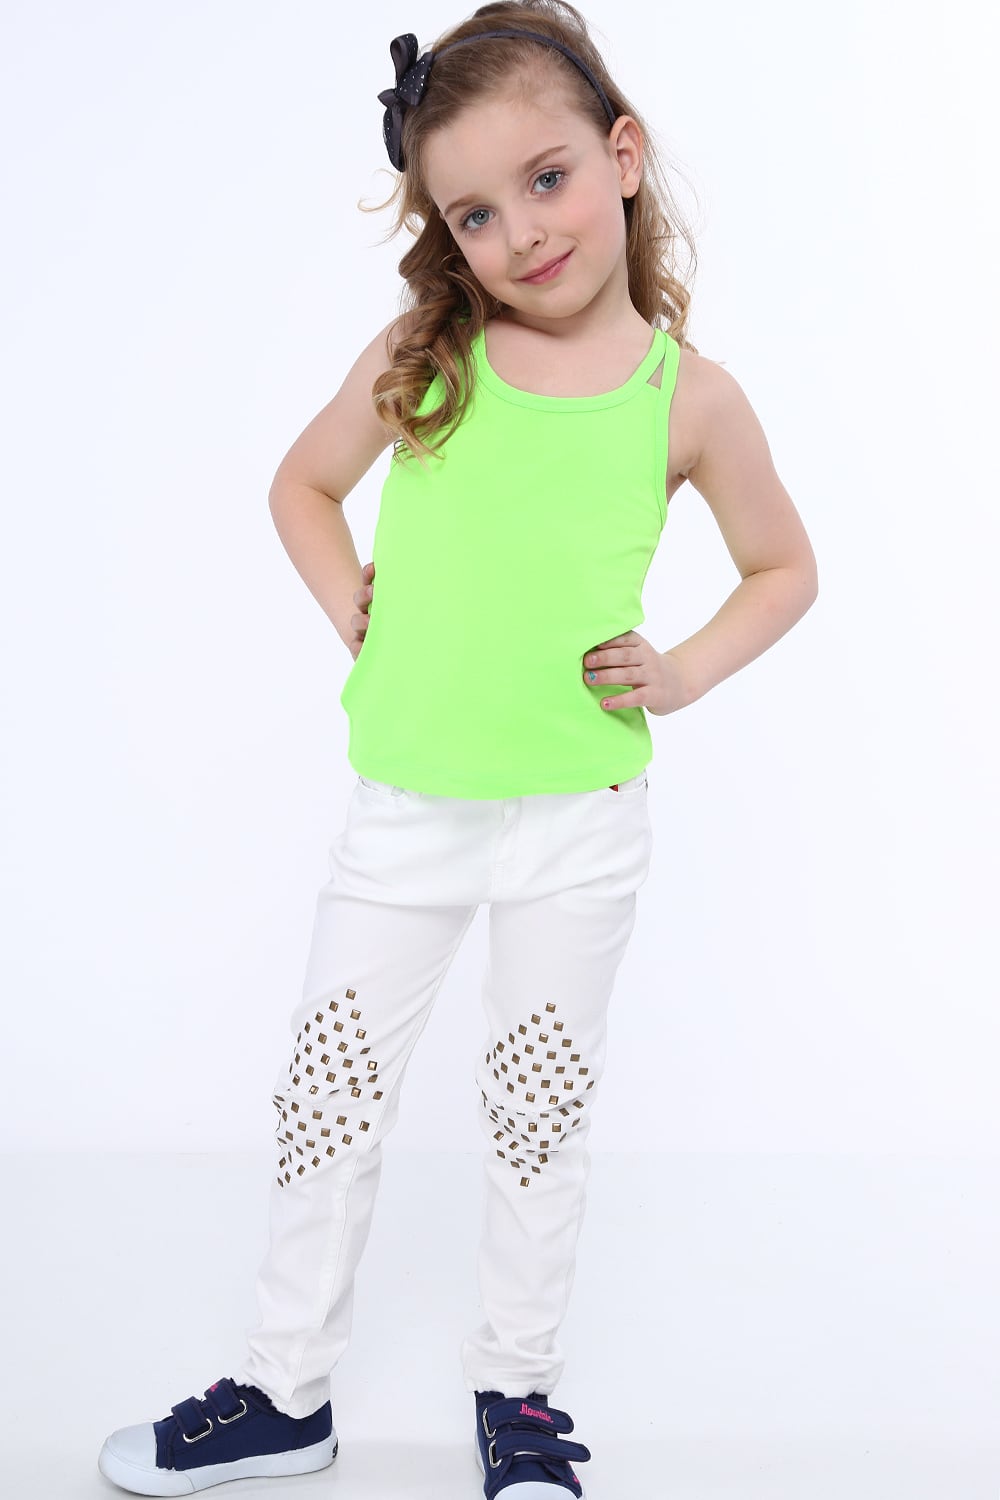 Girls' T-shirt with double straps, fluo green